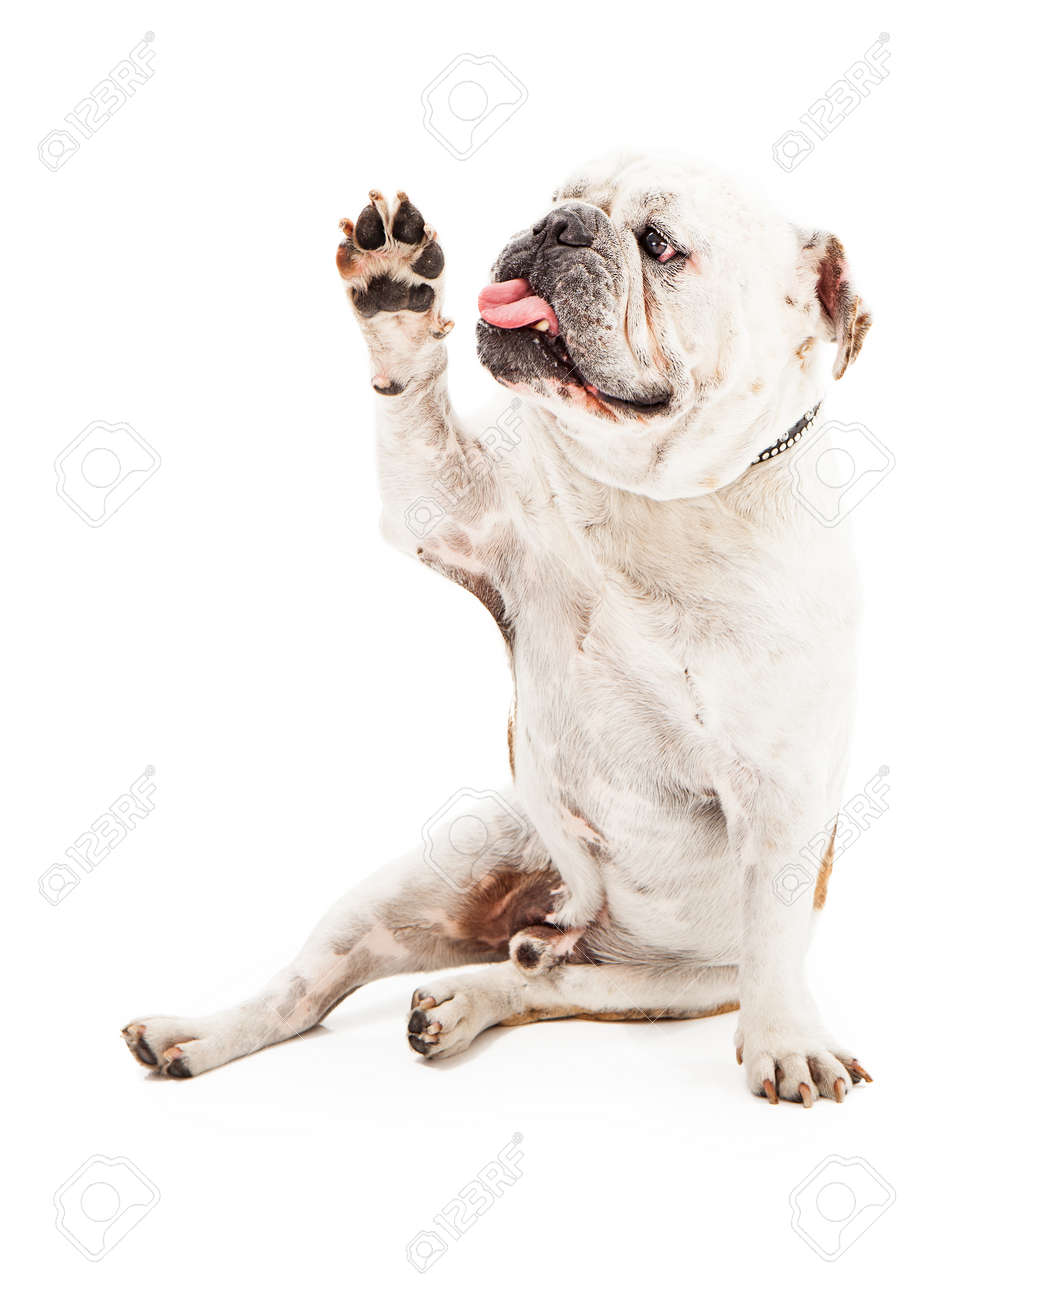 22890039-friendly-english-bulldog-sitting-against-a-white-backdrop-with-one-paw-up-to-give-a-high-five.jpg